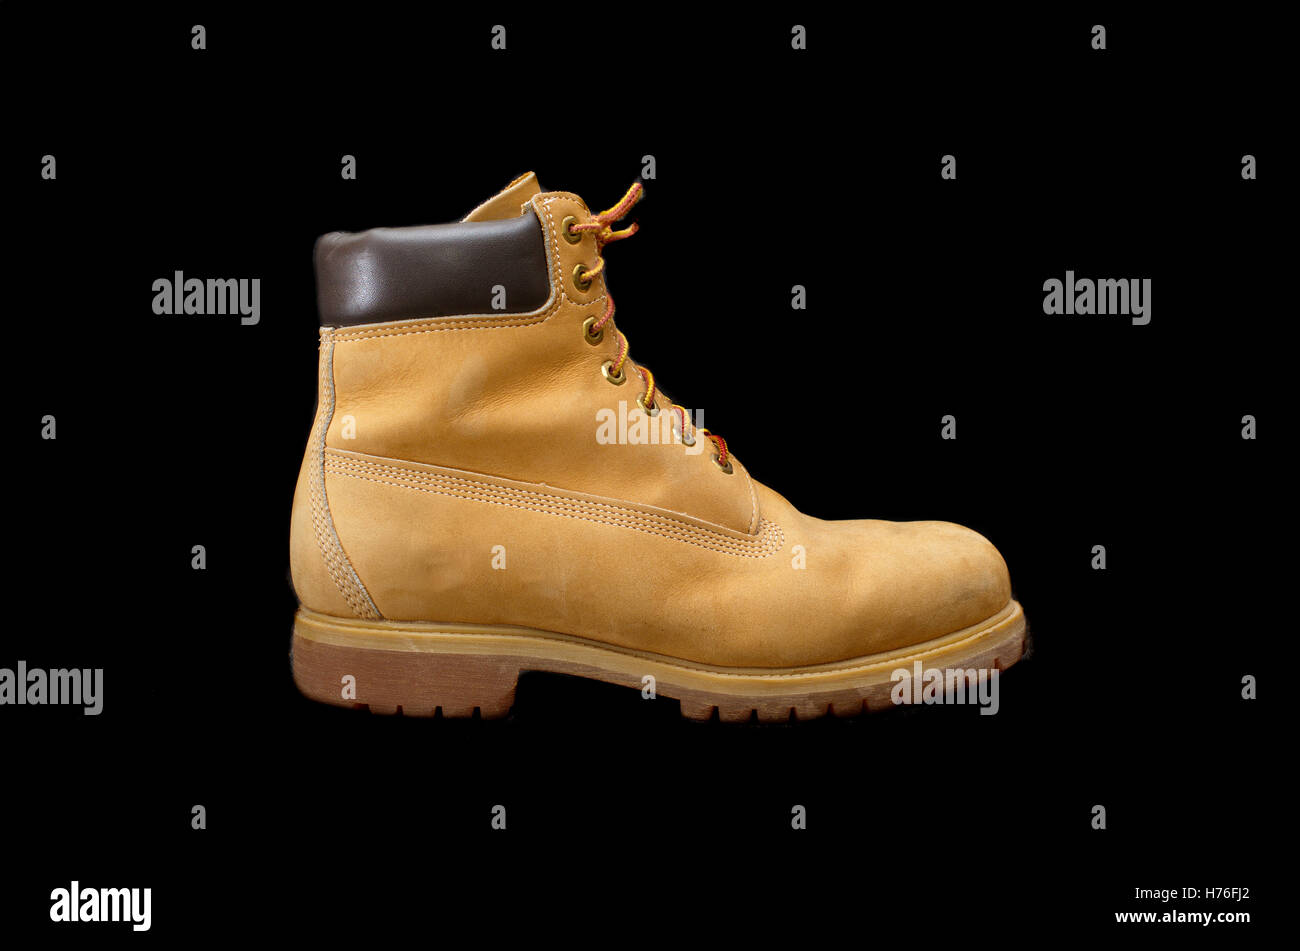 Authentic 8 inch Yellow Work Boot isolated on black Stock Photo